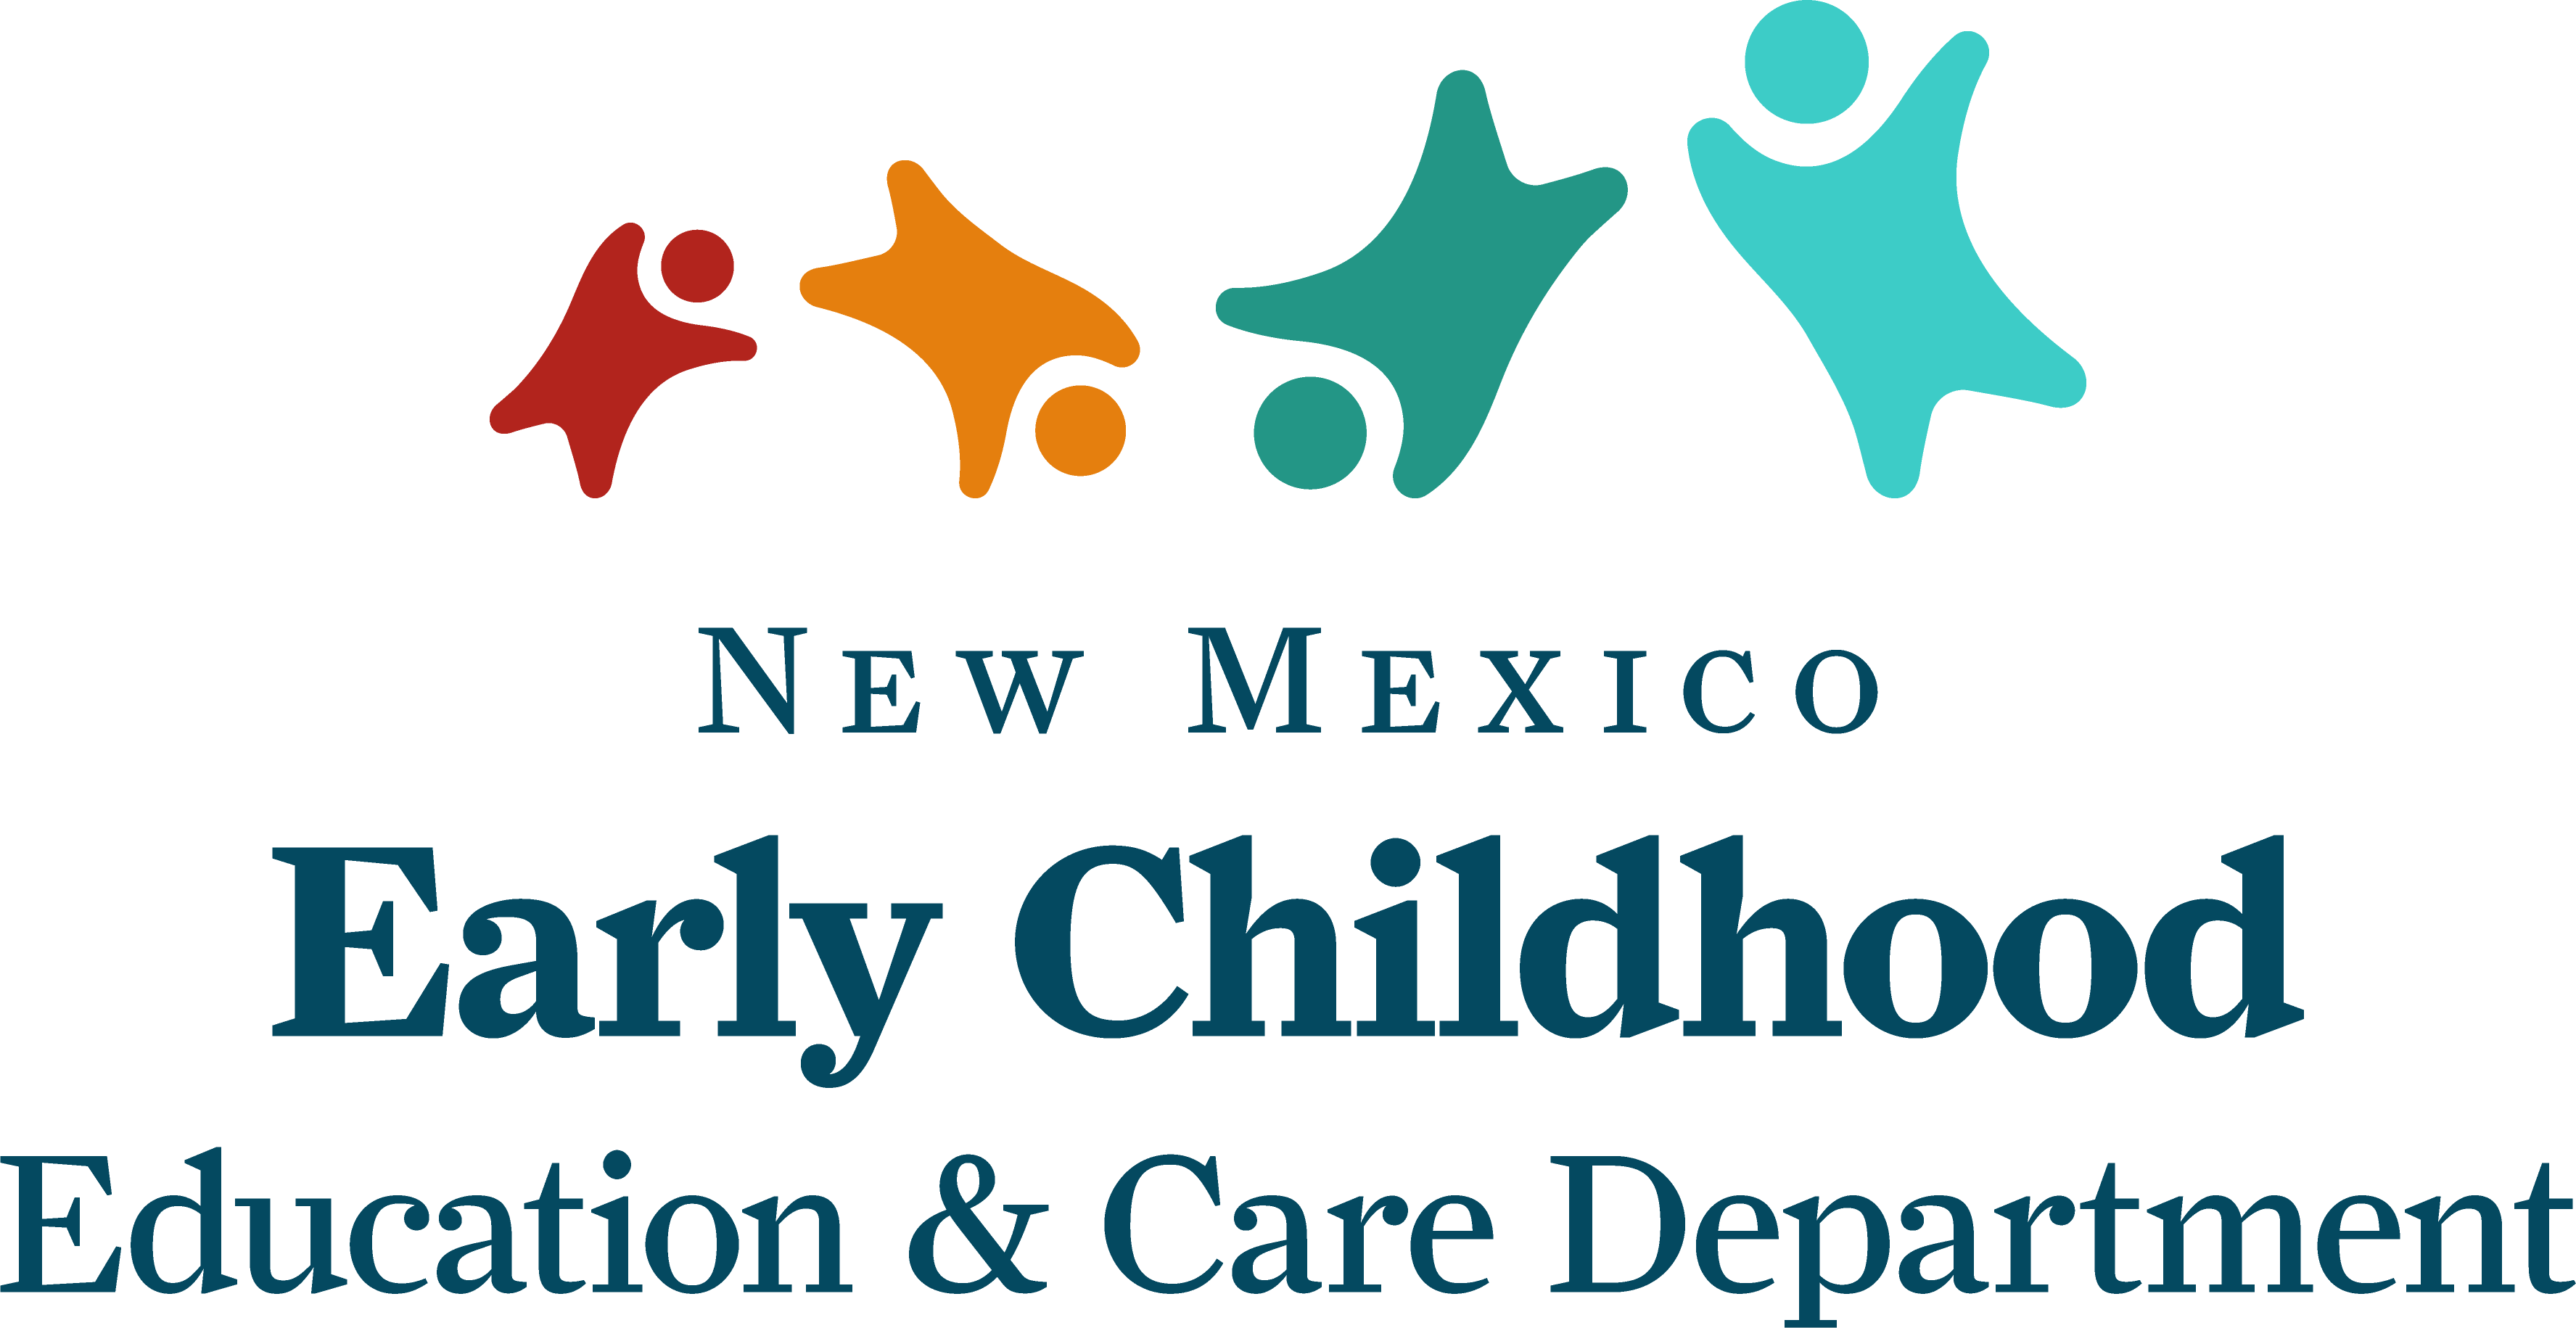 New Mexico Early Childhood Education & Care Department logo